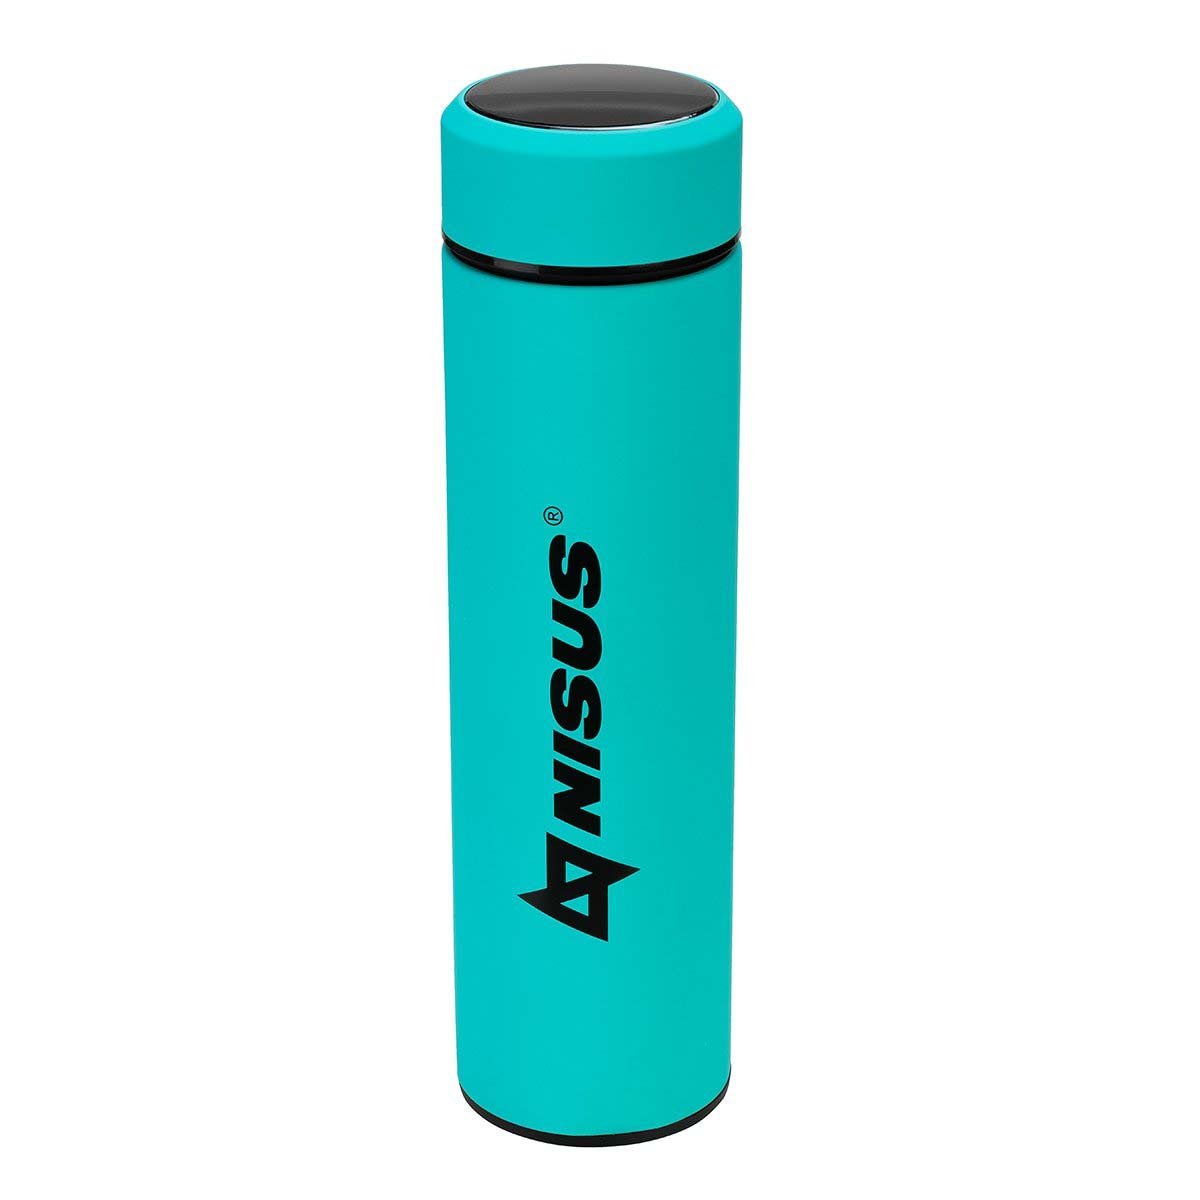 Stainless Insulated Water Bottle with LED Temperature Display, 15 oz, turquoise